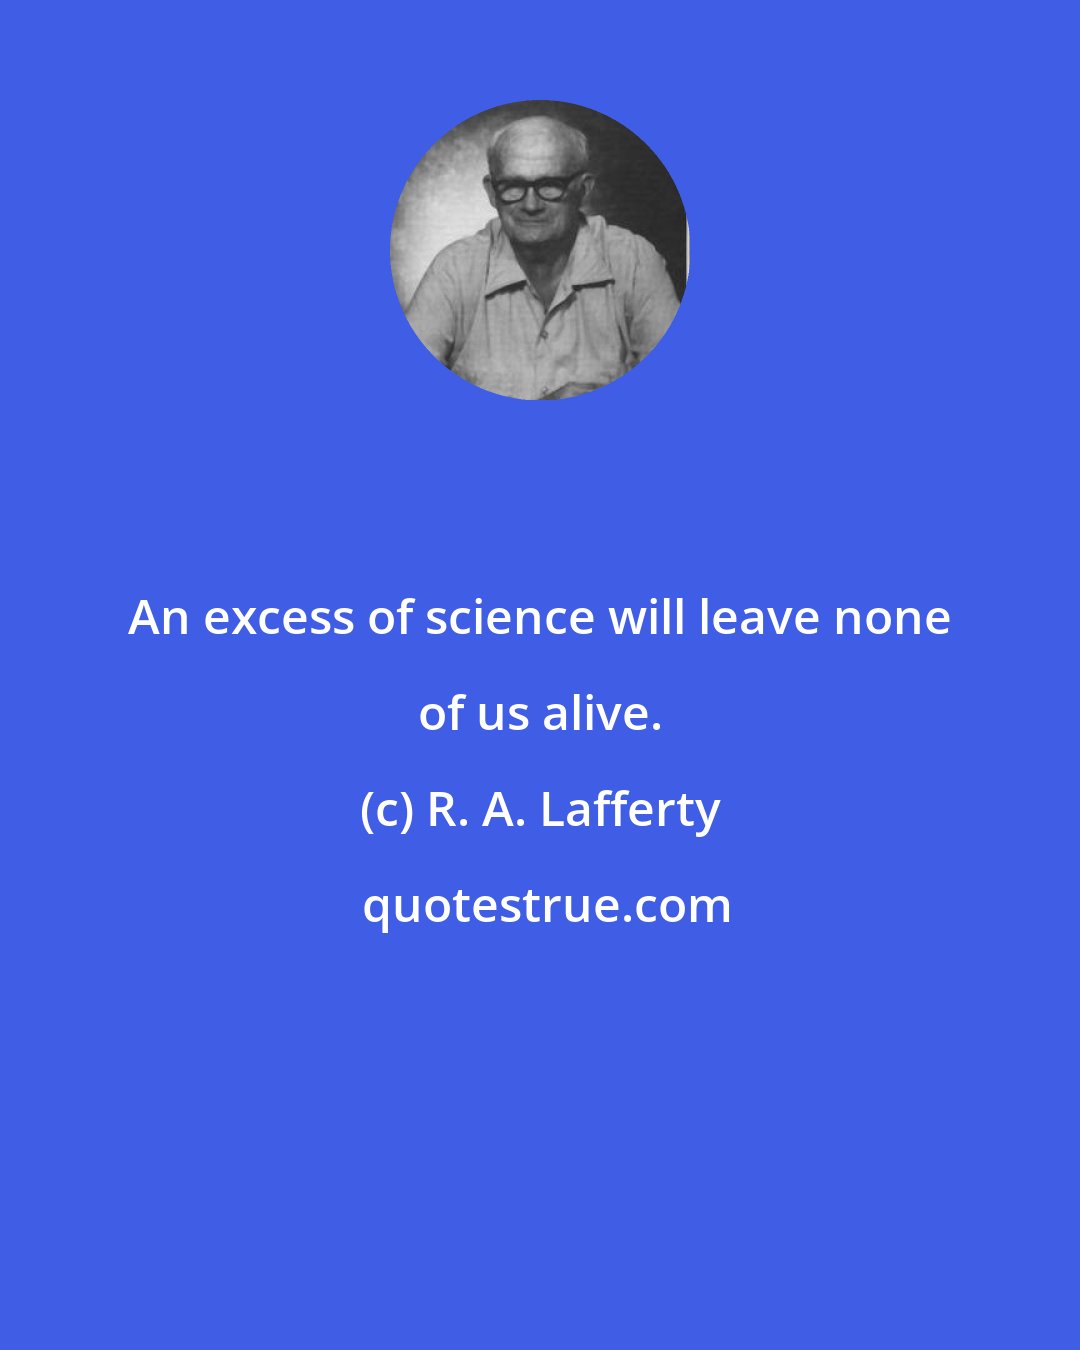 R. A. Lafferty: An excess of science will leave none of us alive.